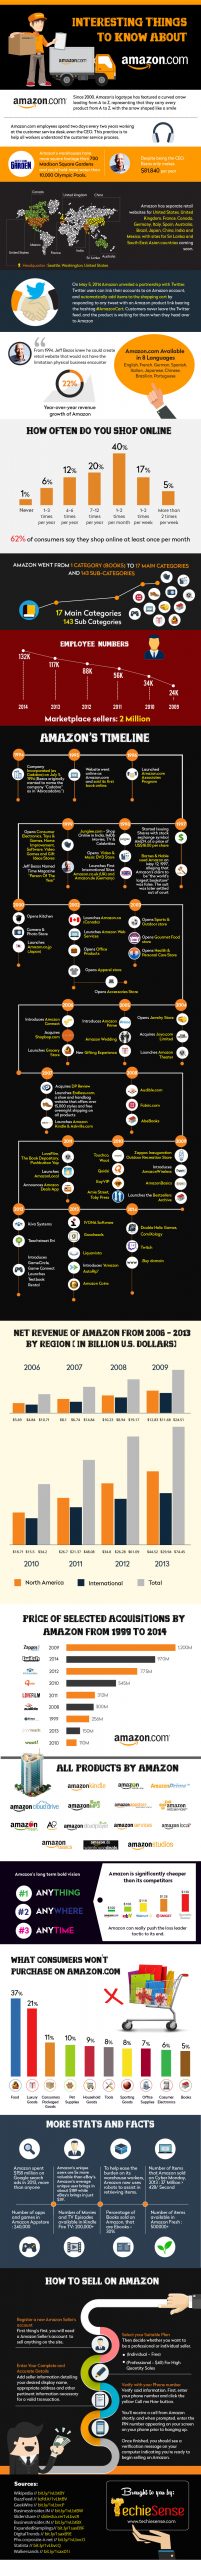 Amazon-Facts-and-Stats-2014-Infographic